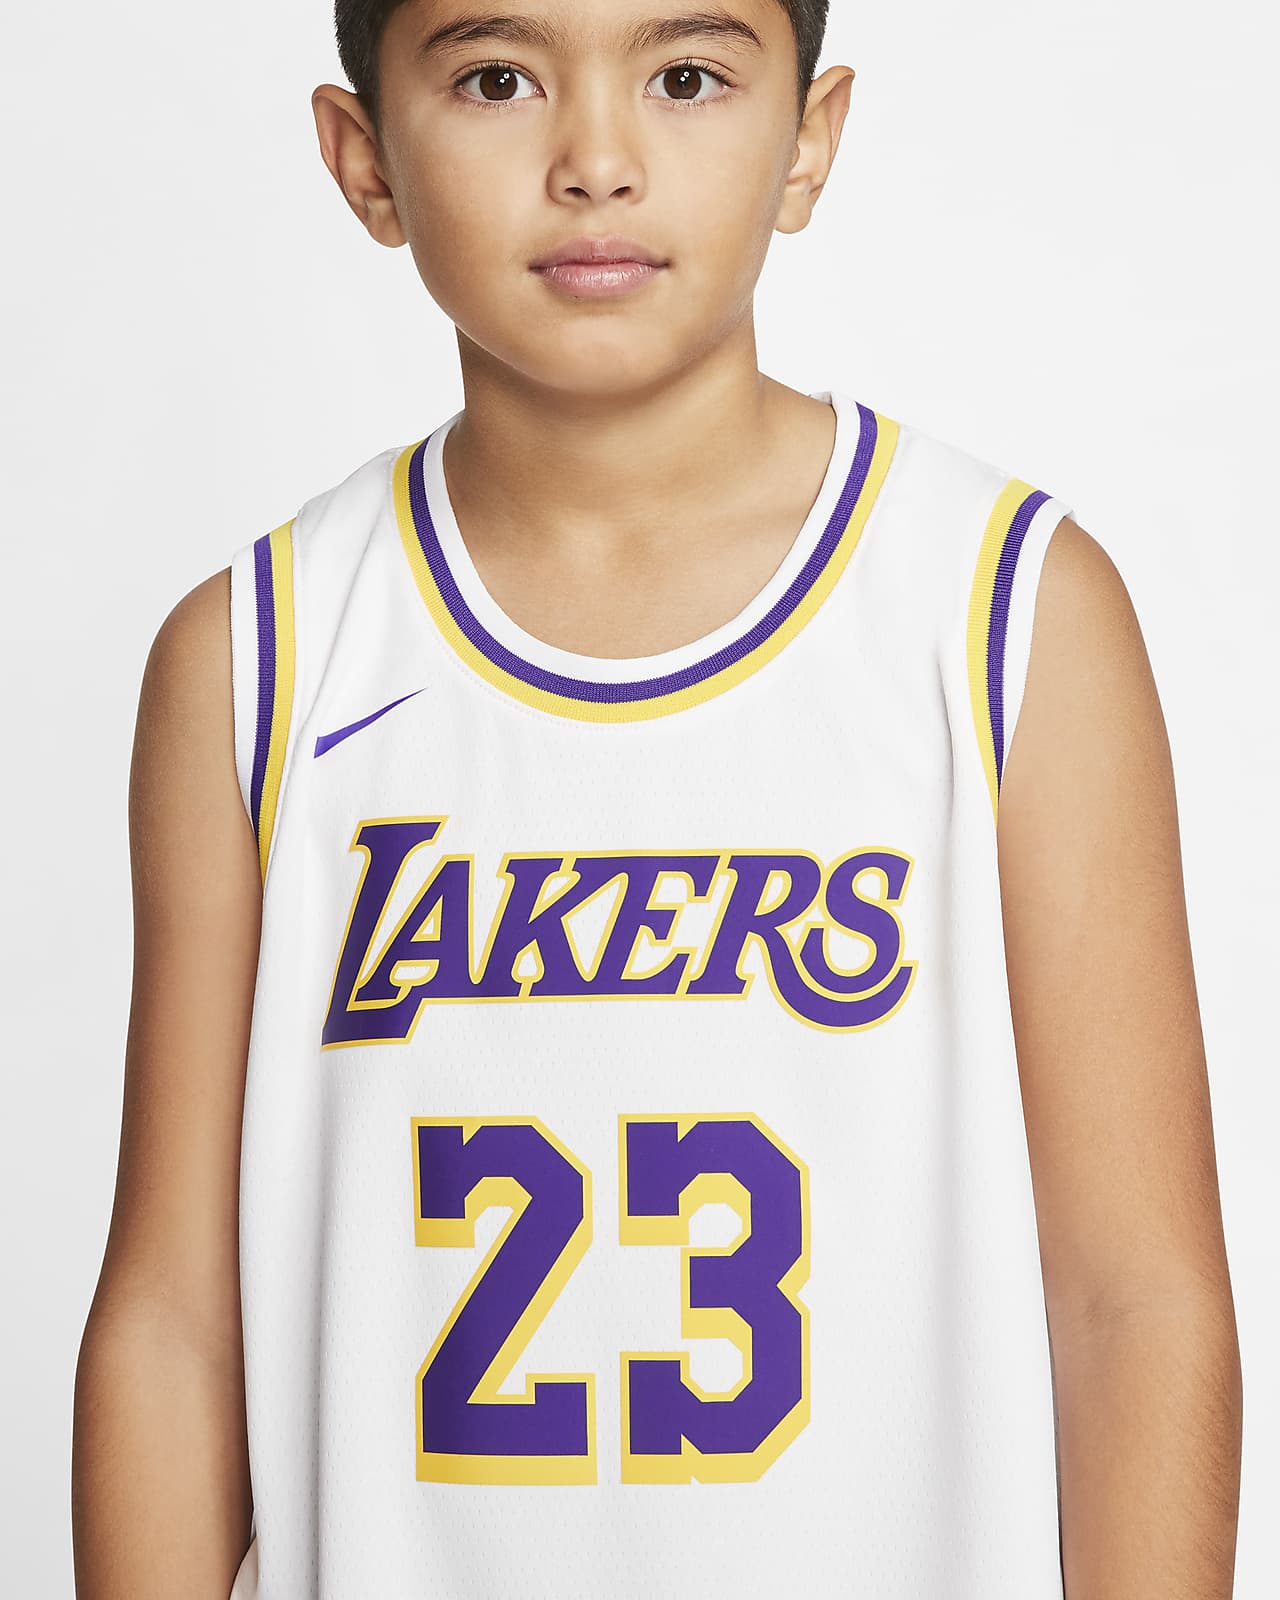 lakers youth lebron jersey Off 57% - www.bashhguidelines.org